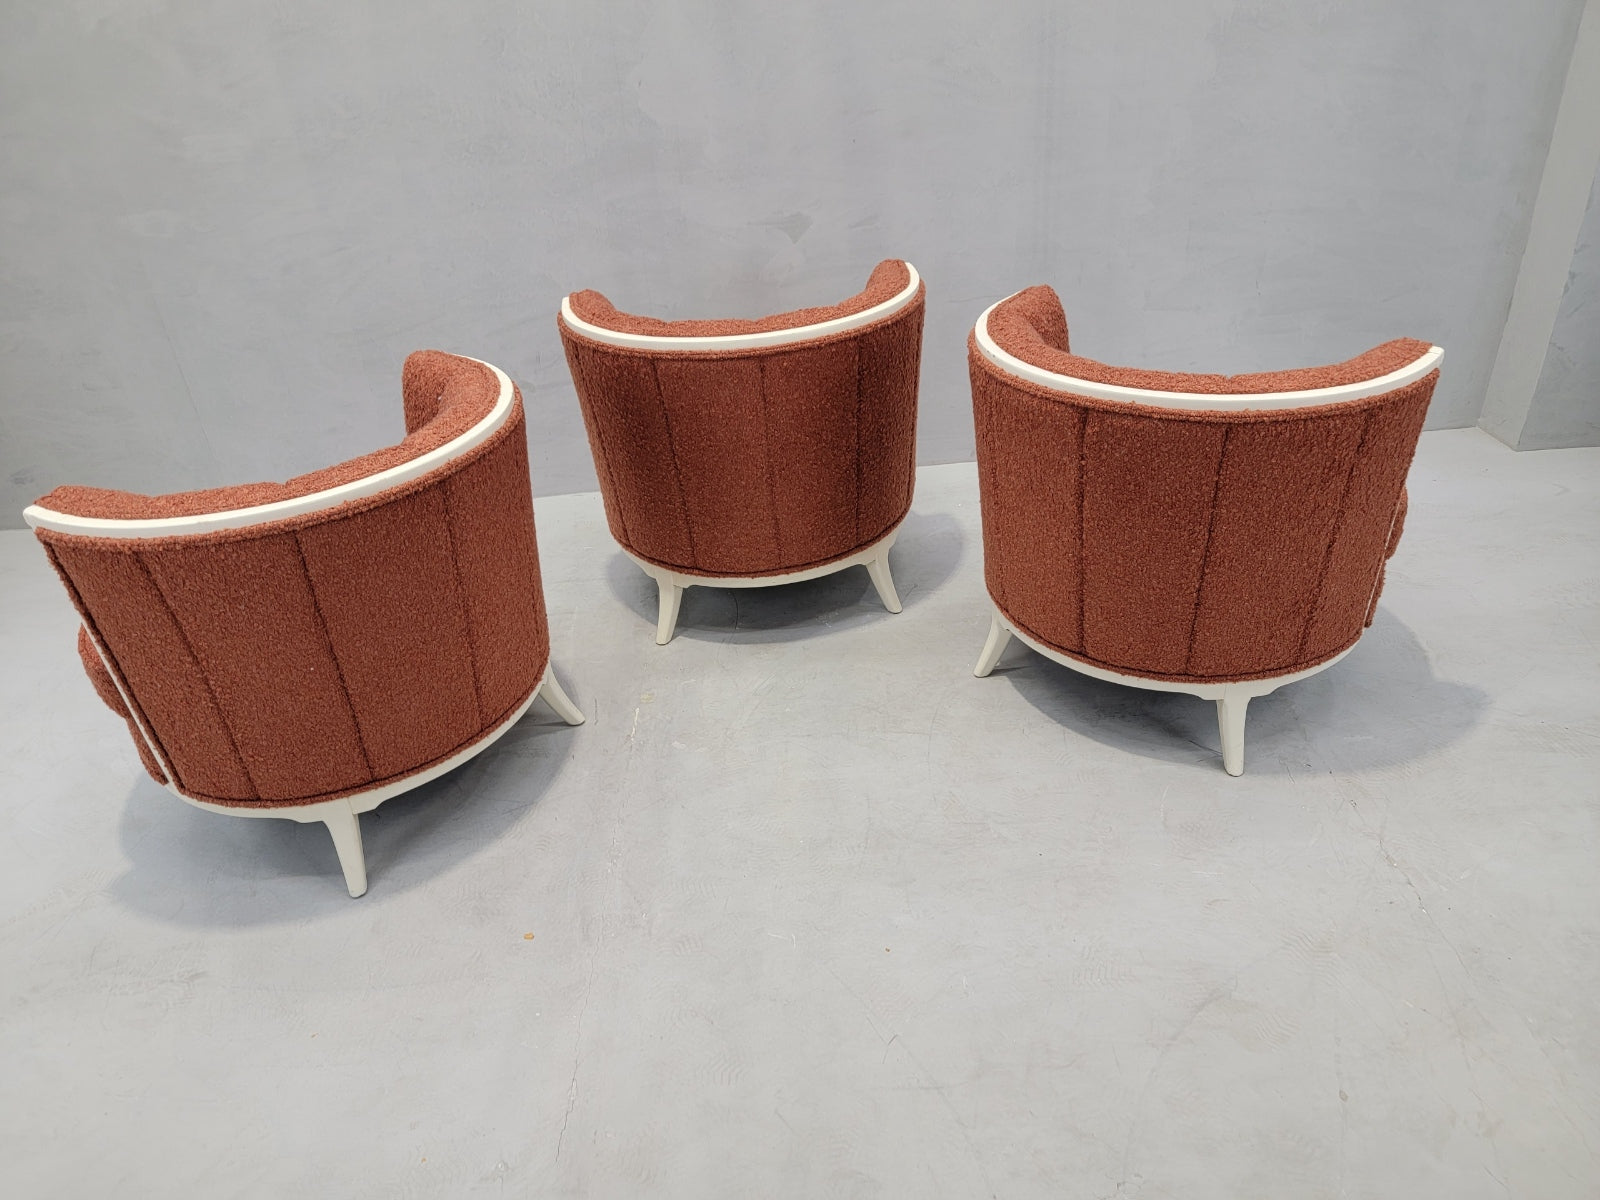 Art Deco Channel Barrel Back Club Chairs Newly Restored & Fully Upholstered in a Burnt Orange Boucle - Set of 3